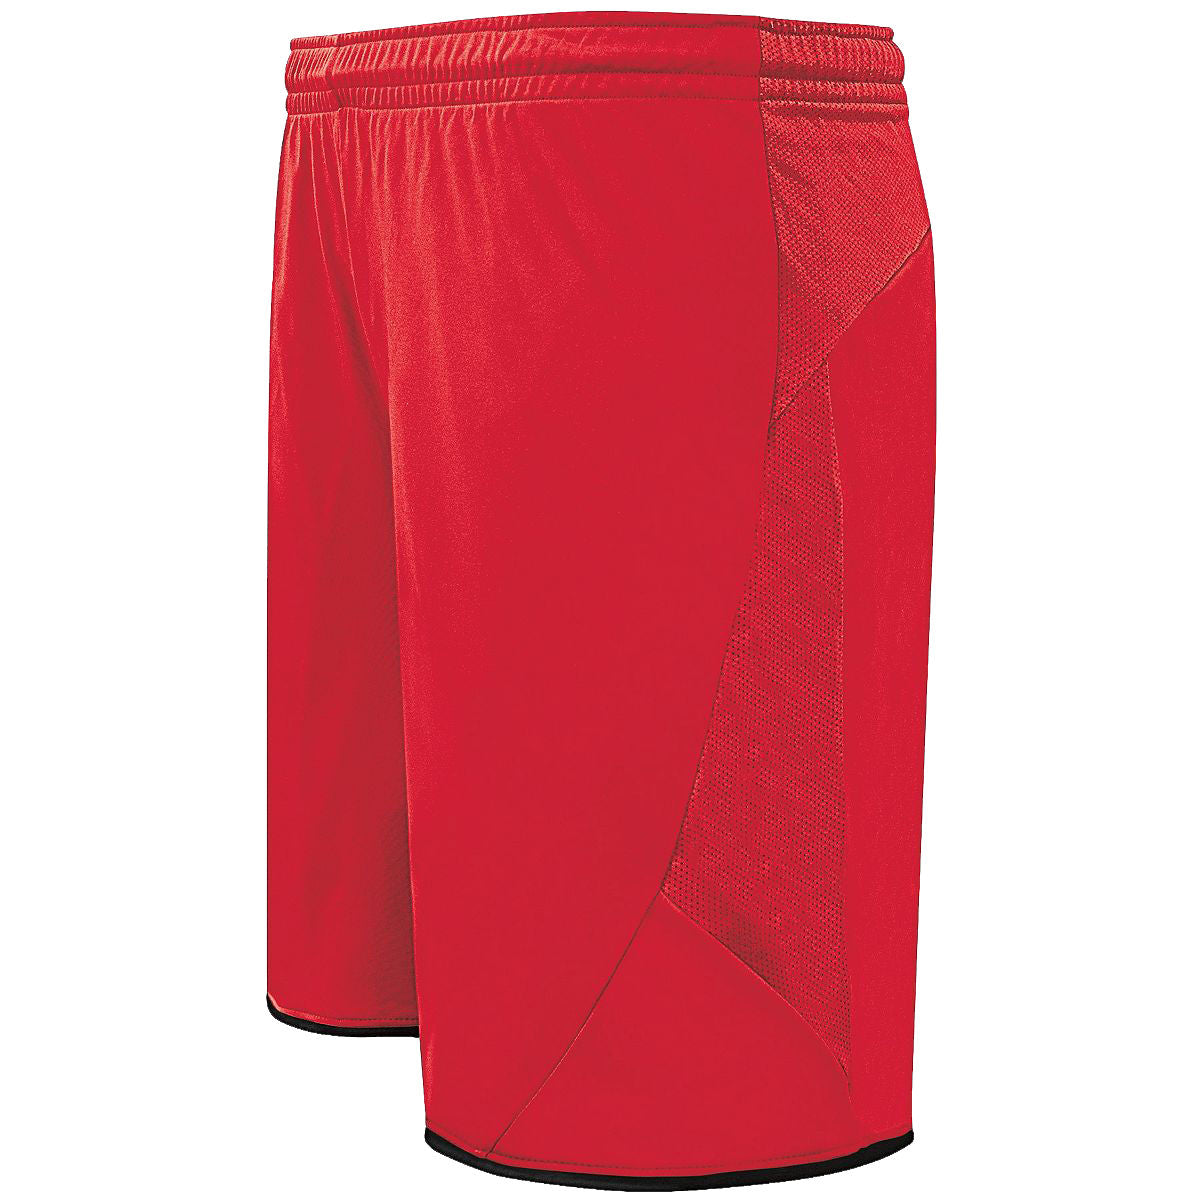 High 5 Club Shorts in Scarlet/Black  -Part of the Adult, Adult-Shorts, High5-Products, Soccer, All-Sports-1 product lines at KanaleyCreations.com